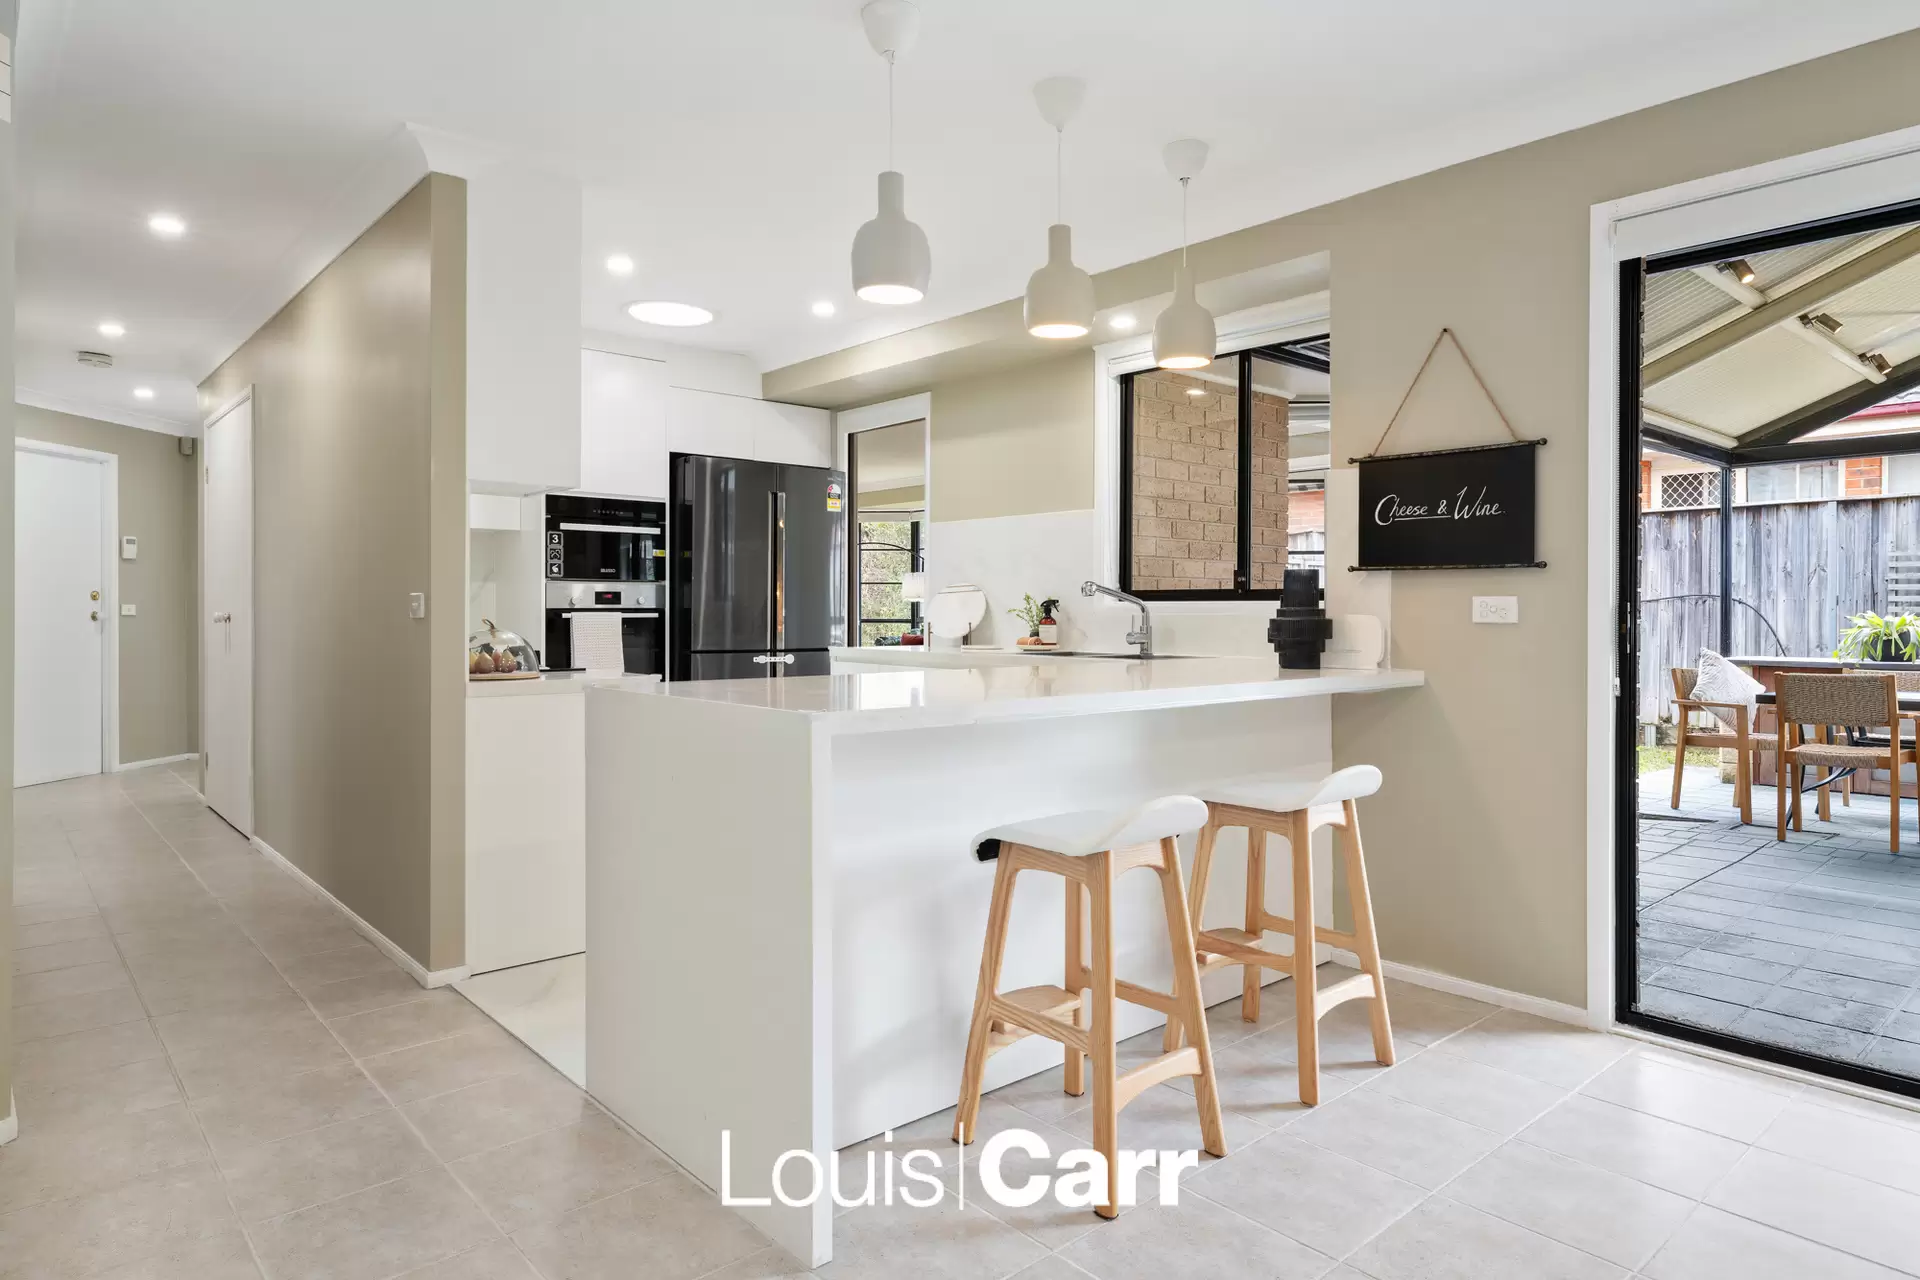 Photo #4: 33 Marsden Avenue, Kellyville - For Sale by Louis Carr Real Estate